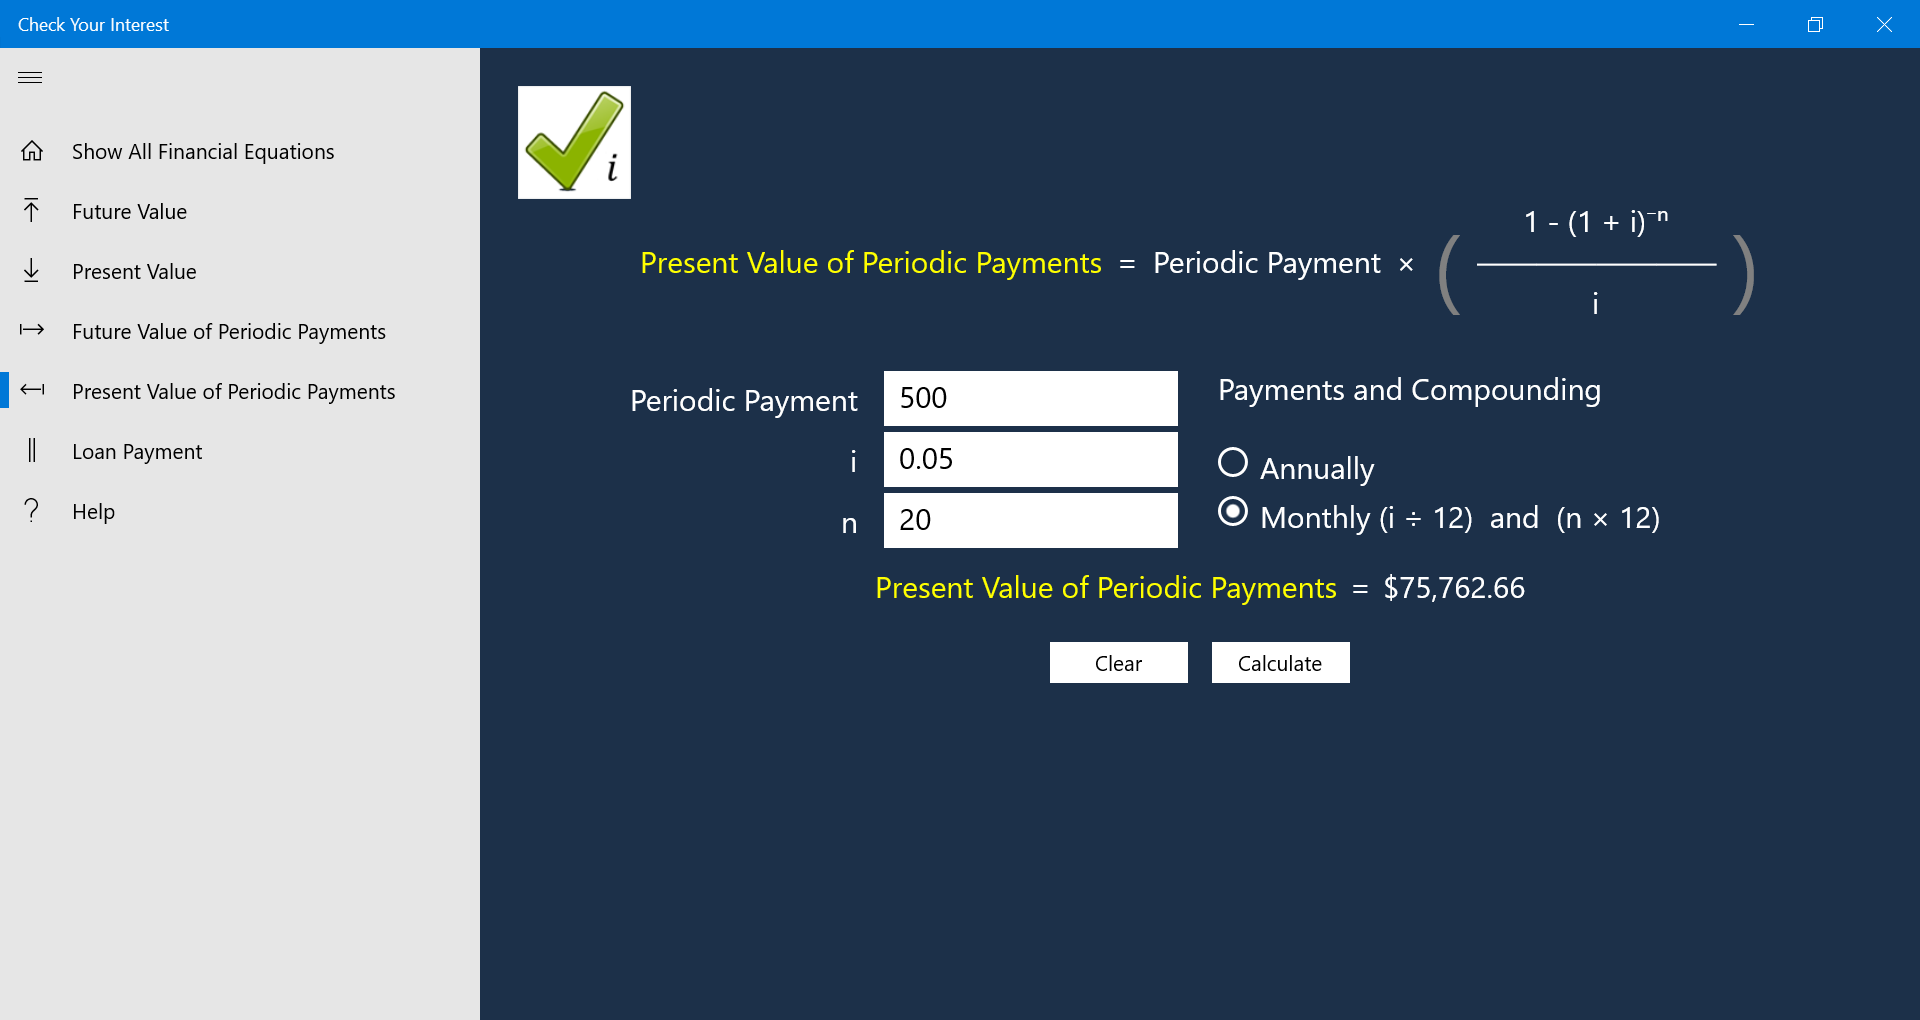 Present Value of Periodic Payments